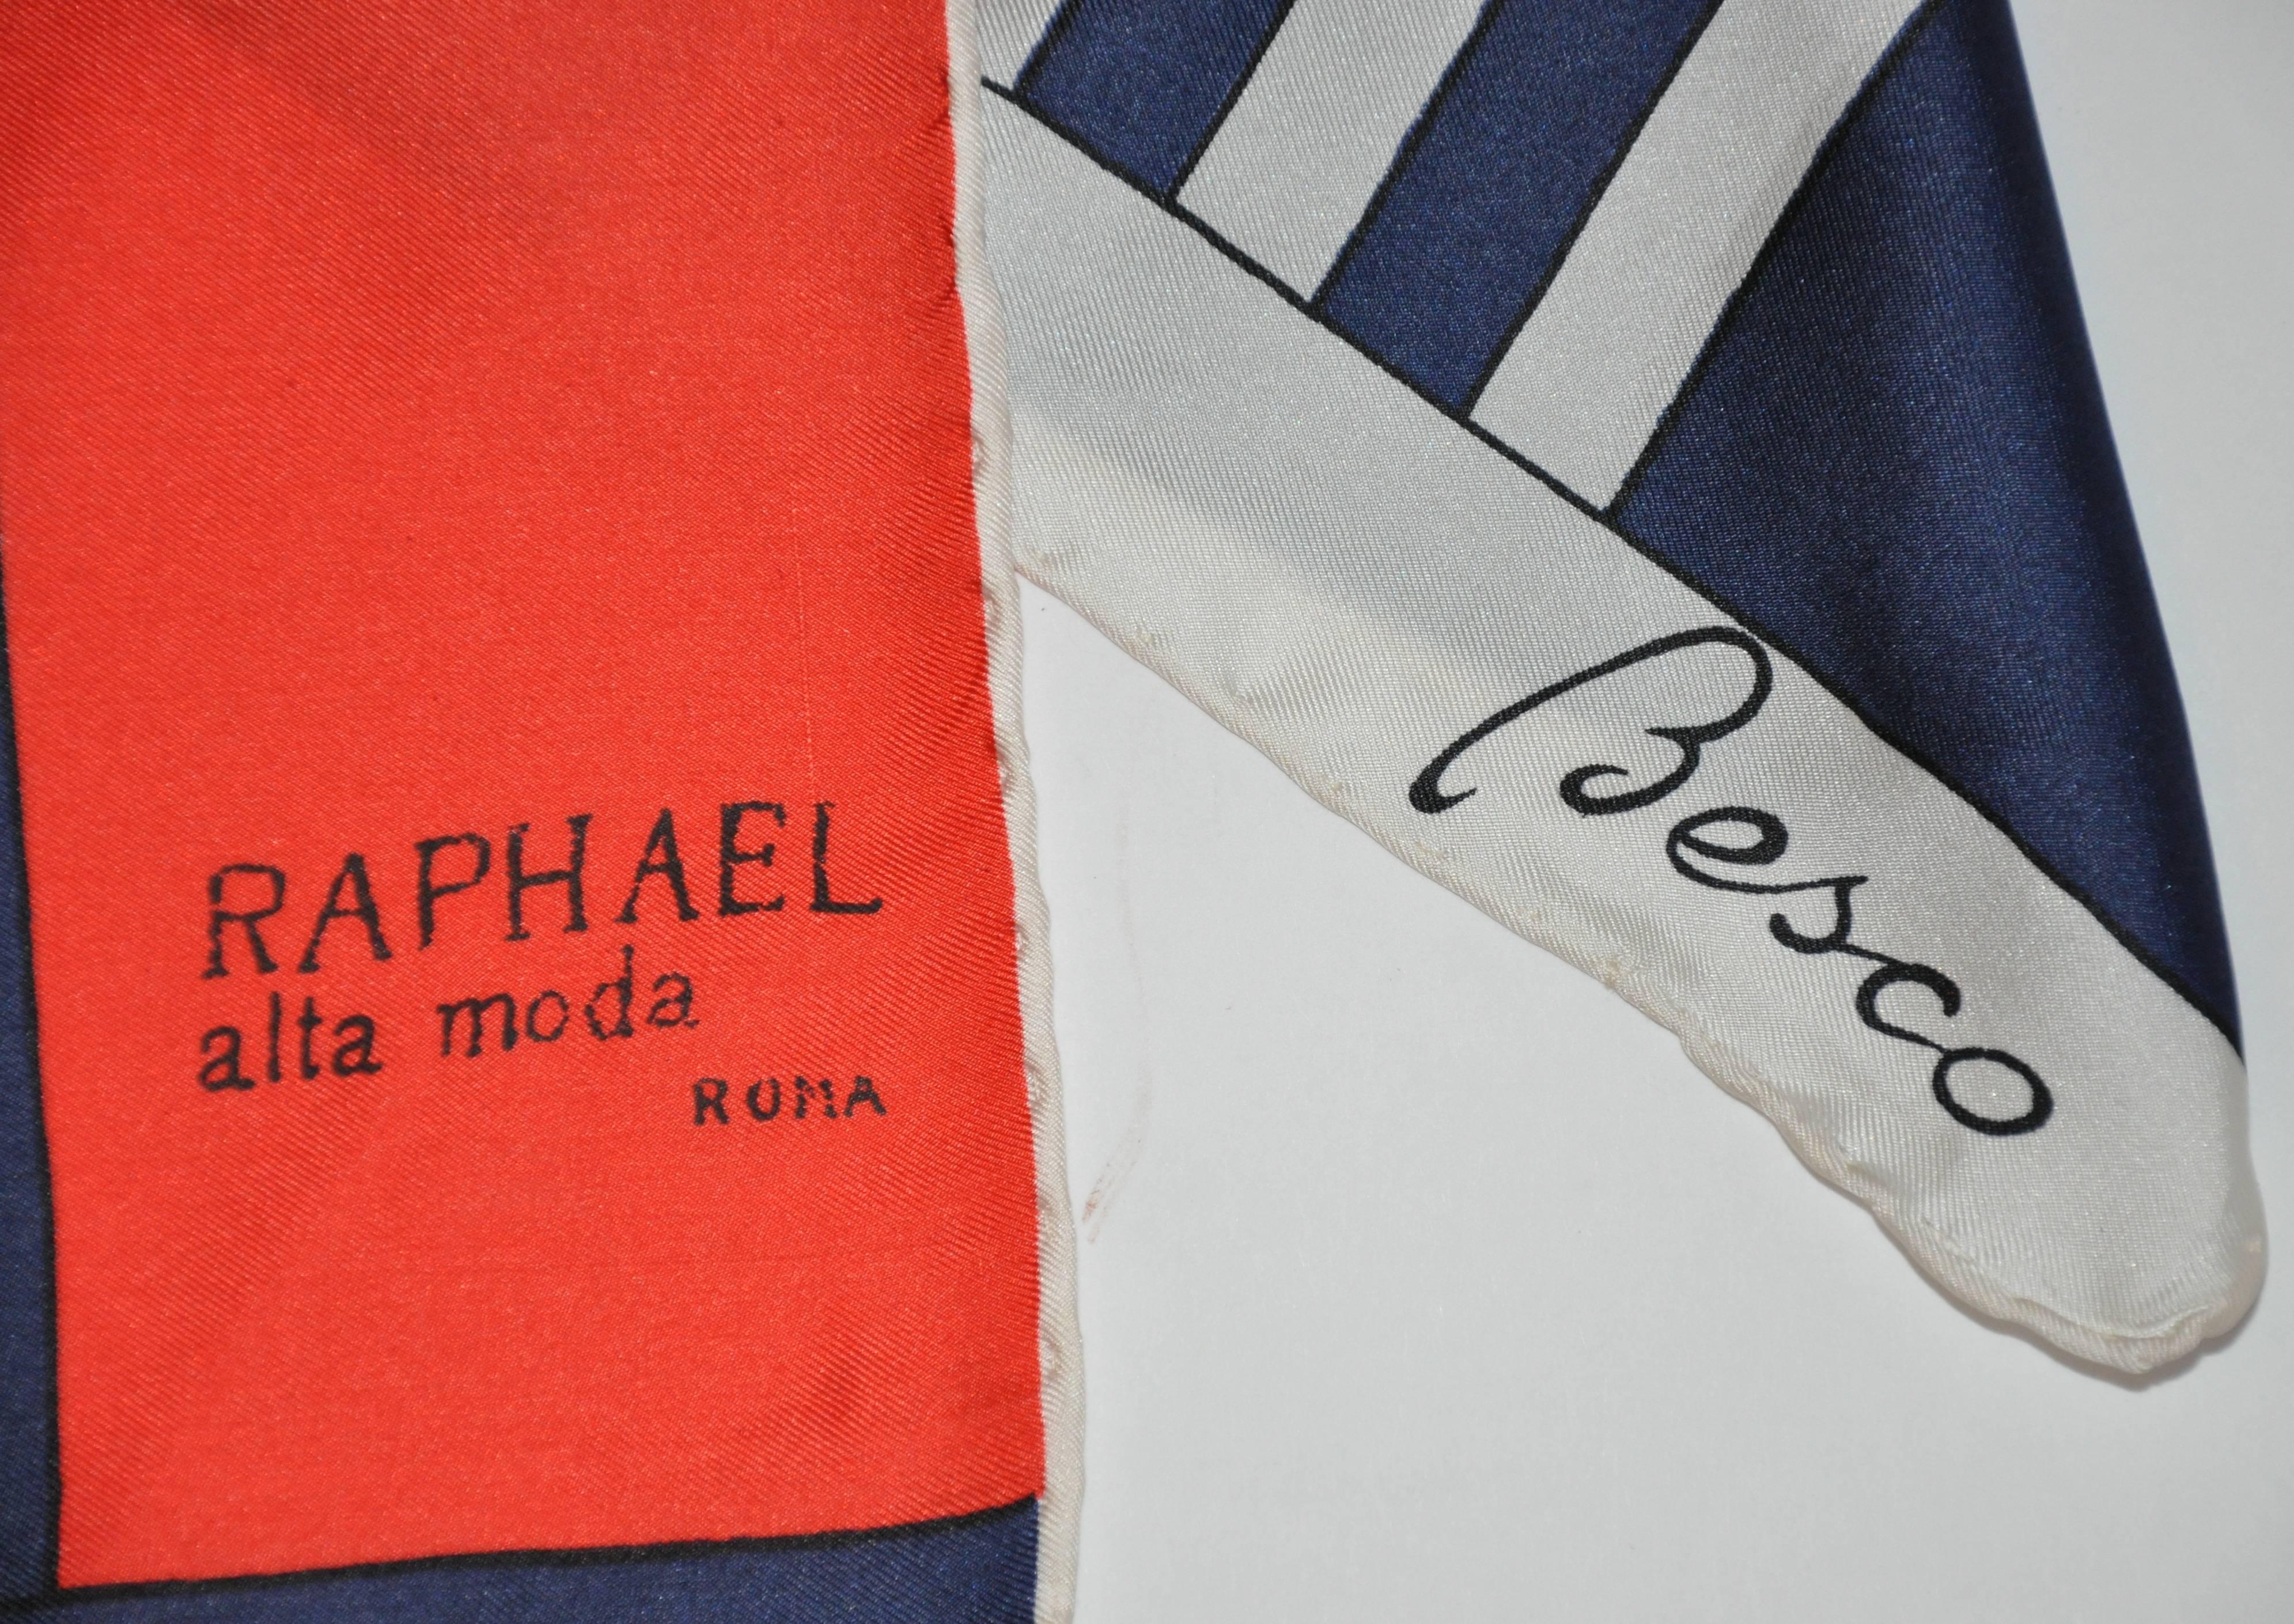         This wonderfully bold graphic red white and blue silk scarf by Besco for Raphael alta moda measures 12 1/2